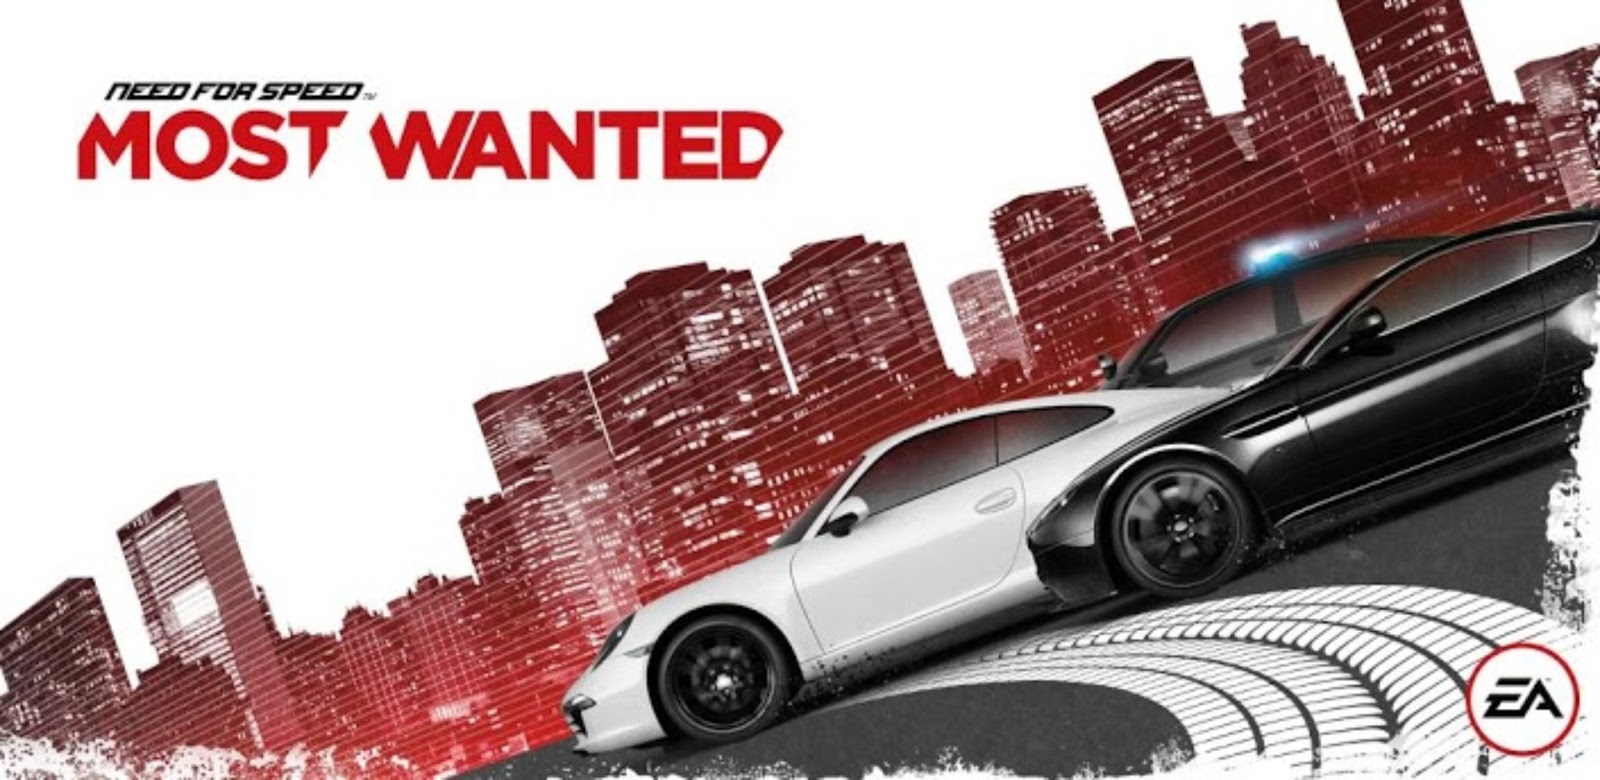 Need for speed most wanted pc apk